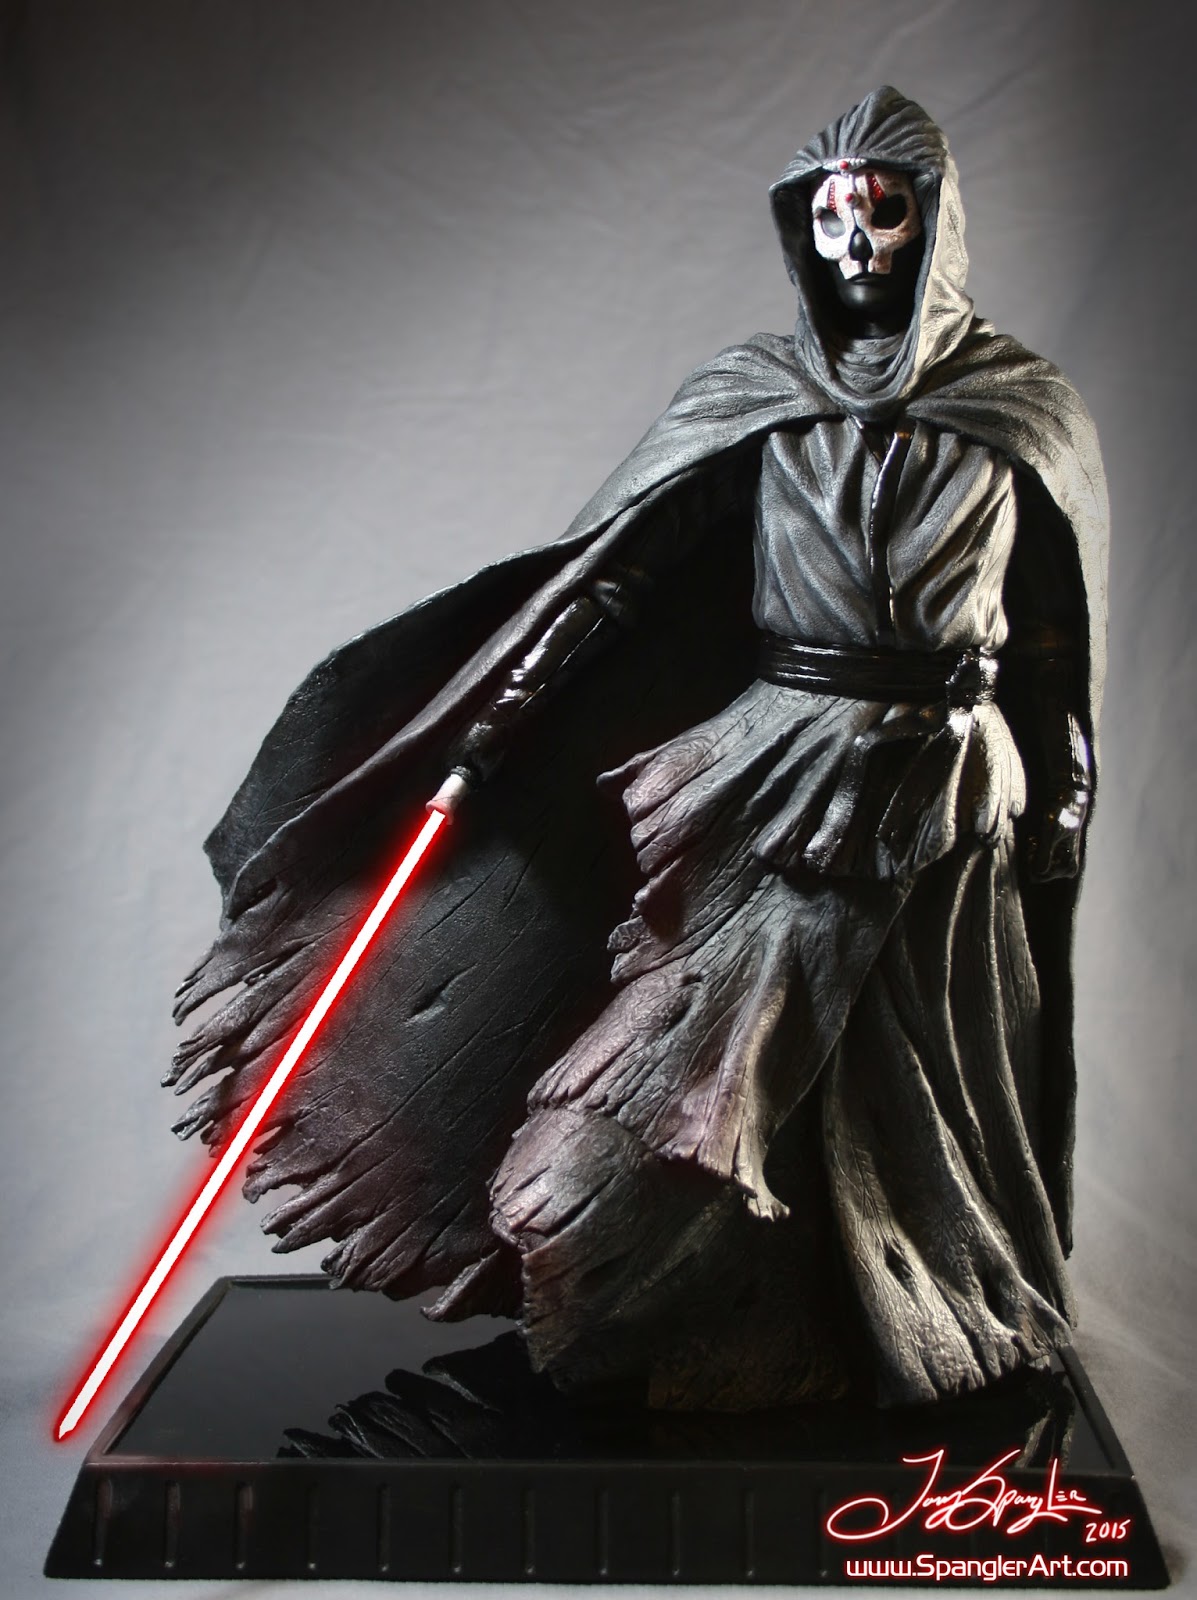 Added some lightsaber effects to my Darth Nihilus sculpt. 